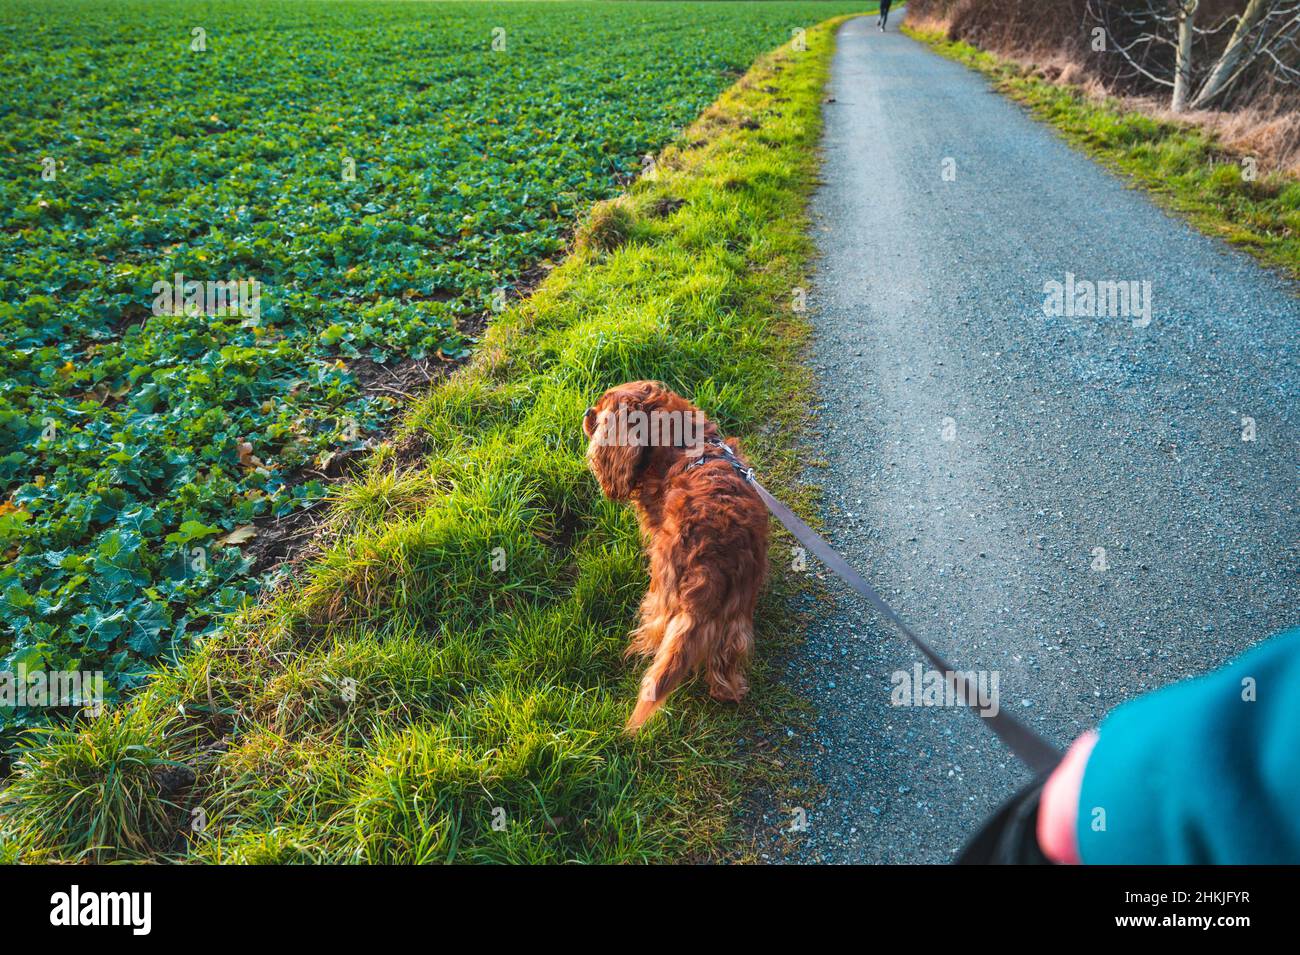 Young woman between 30-35 years old leads her dog on leash Stock Photo